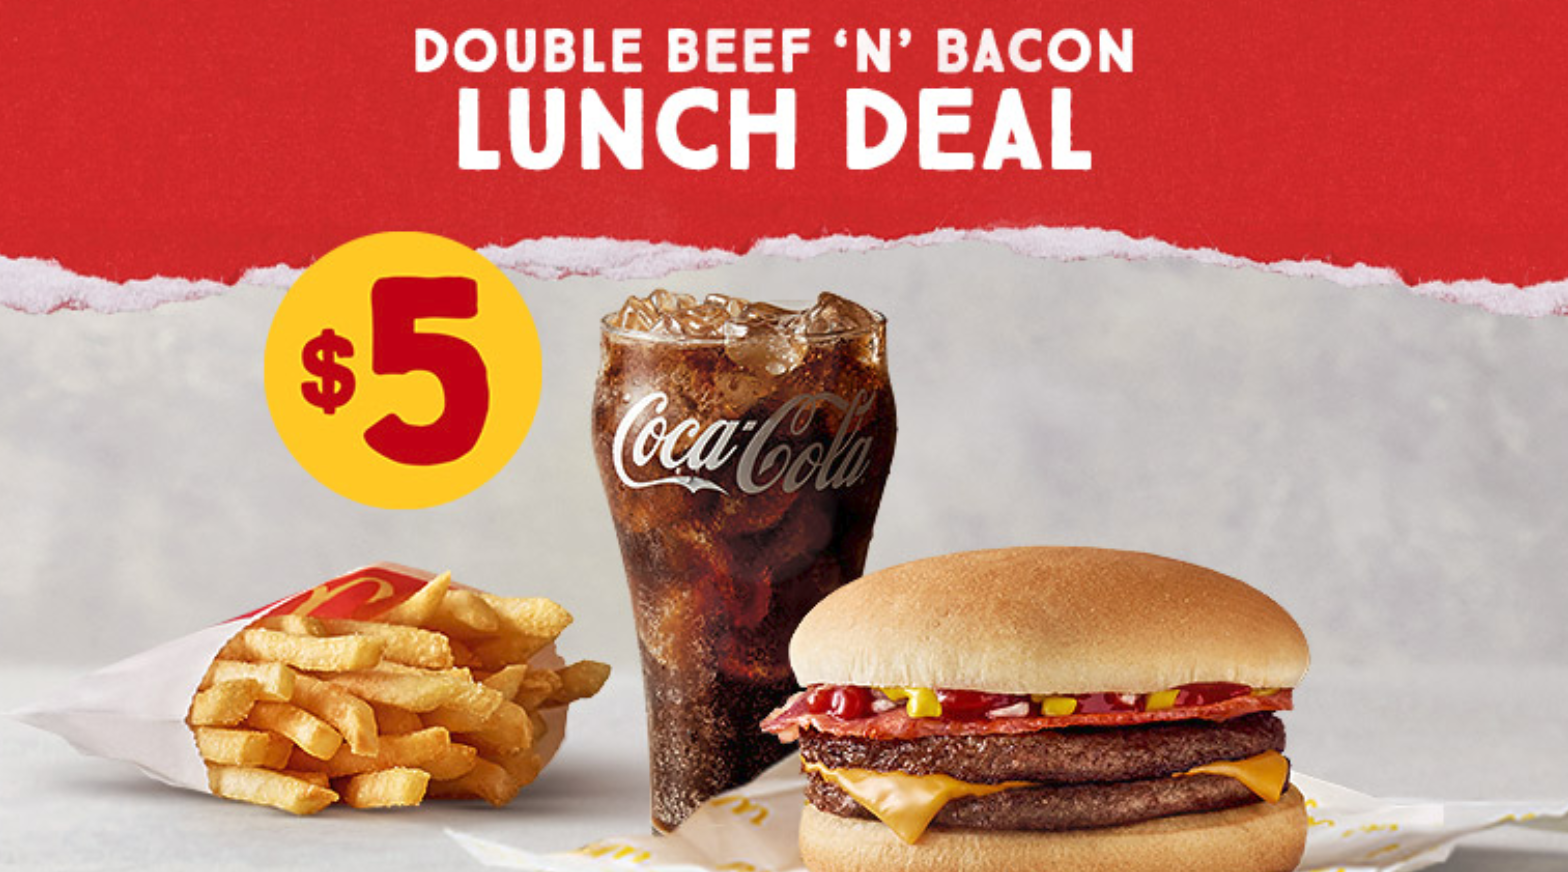 DEAL McDonald's 5 Double Beef ‘n’ Bacon Burger Meal with Small Fries